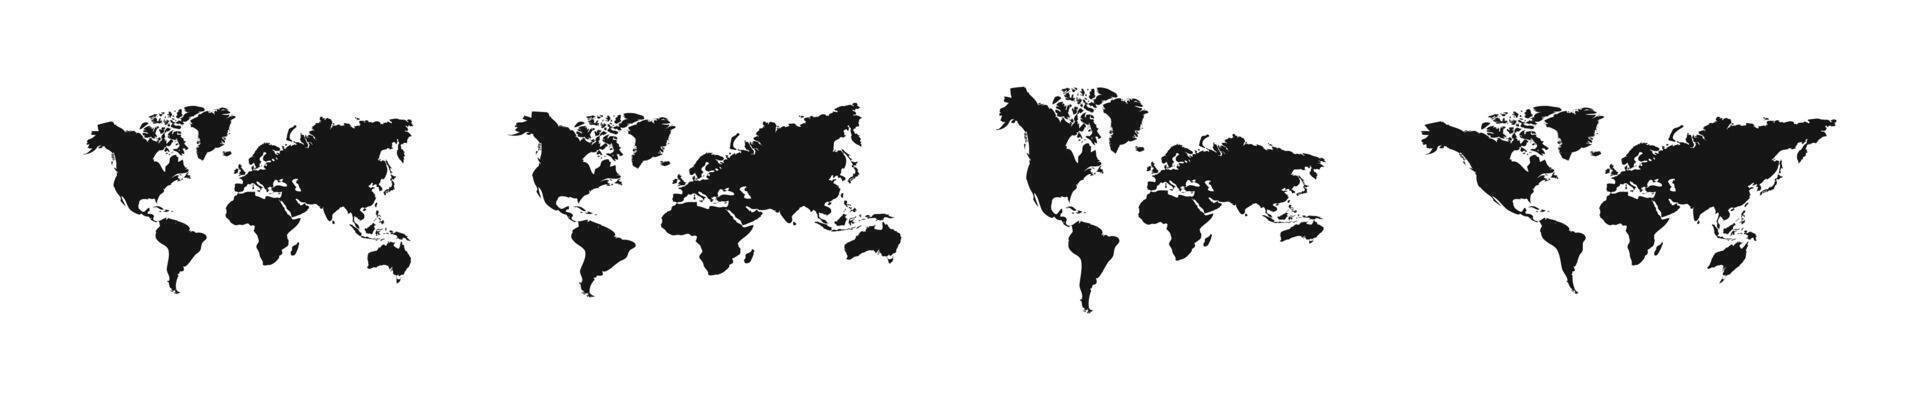 World map. World map template with continents, North and South America, Europe and Asia, Africa and Australia vector